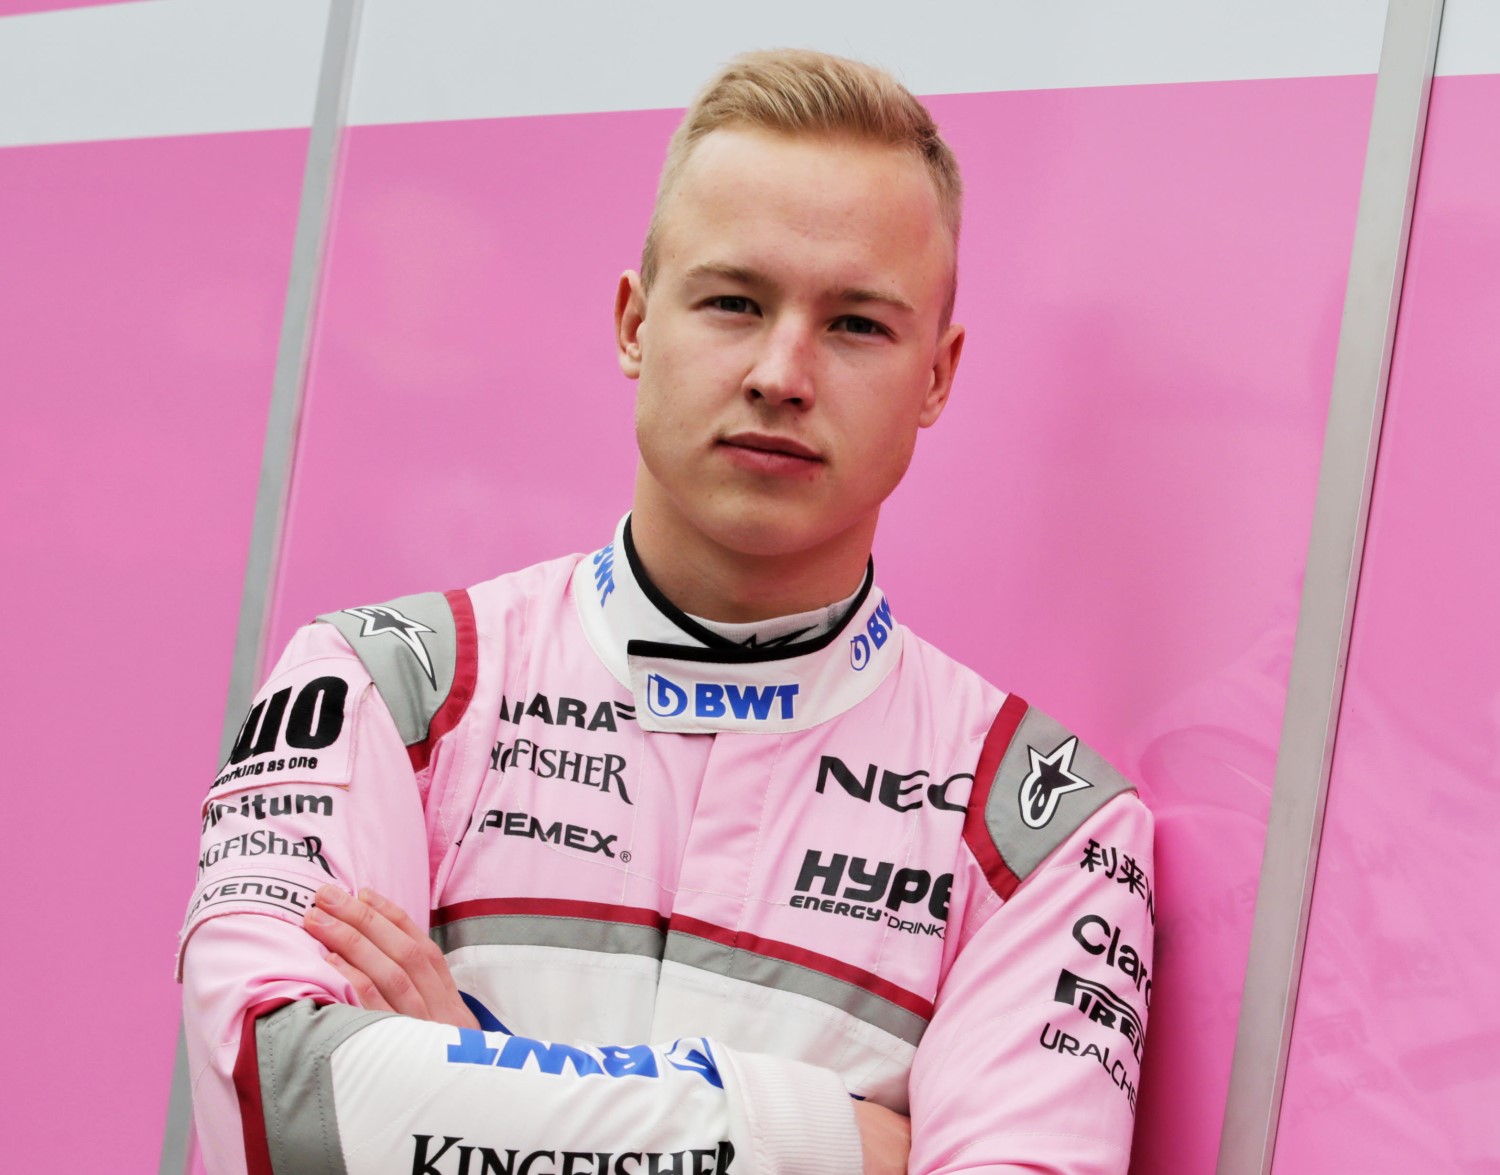 Mazepin's father Dmitry is co-owner of Uralkali. They are certain they were screwed out of the Force India deal. They should just buy the WIlliams team now